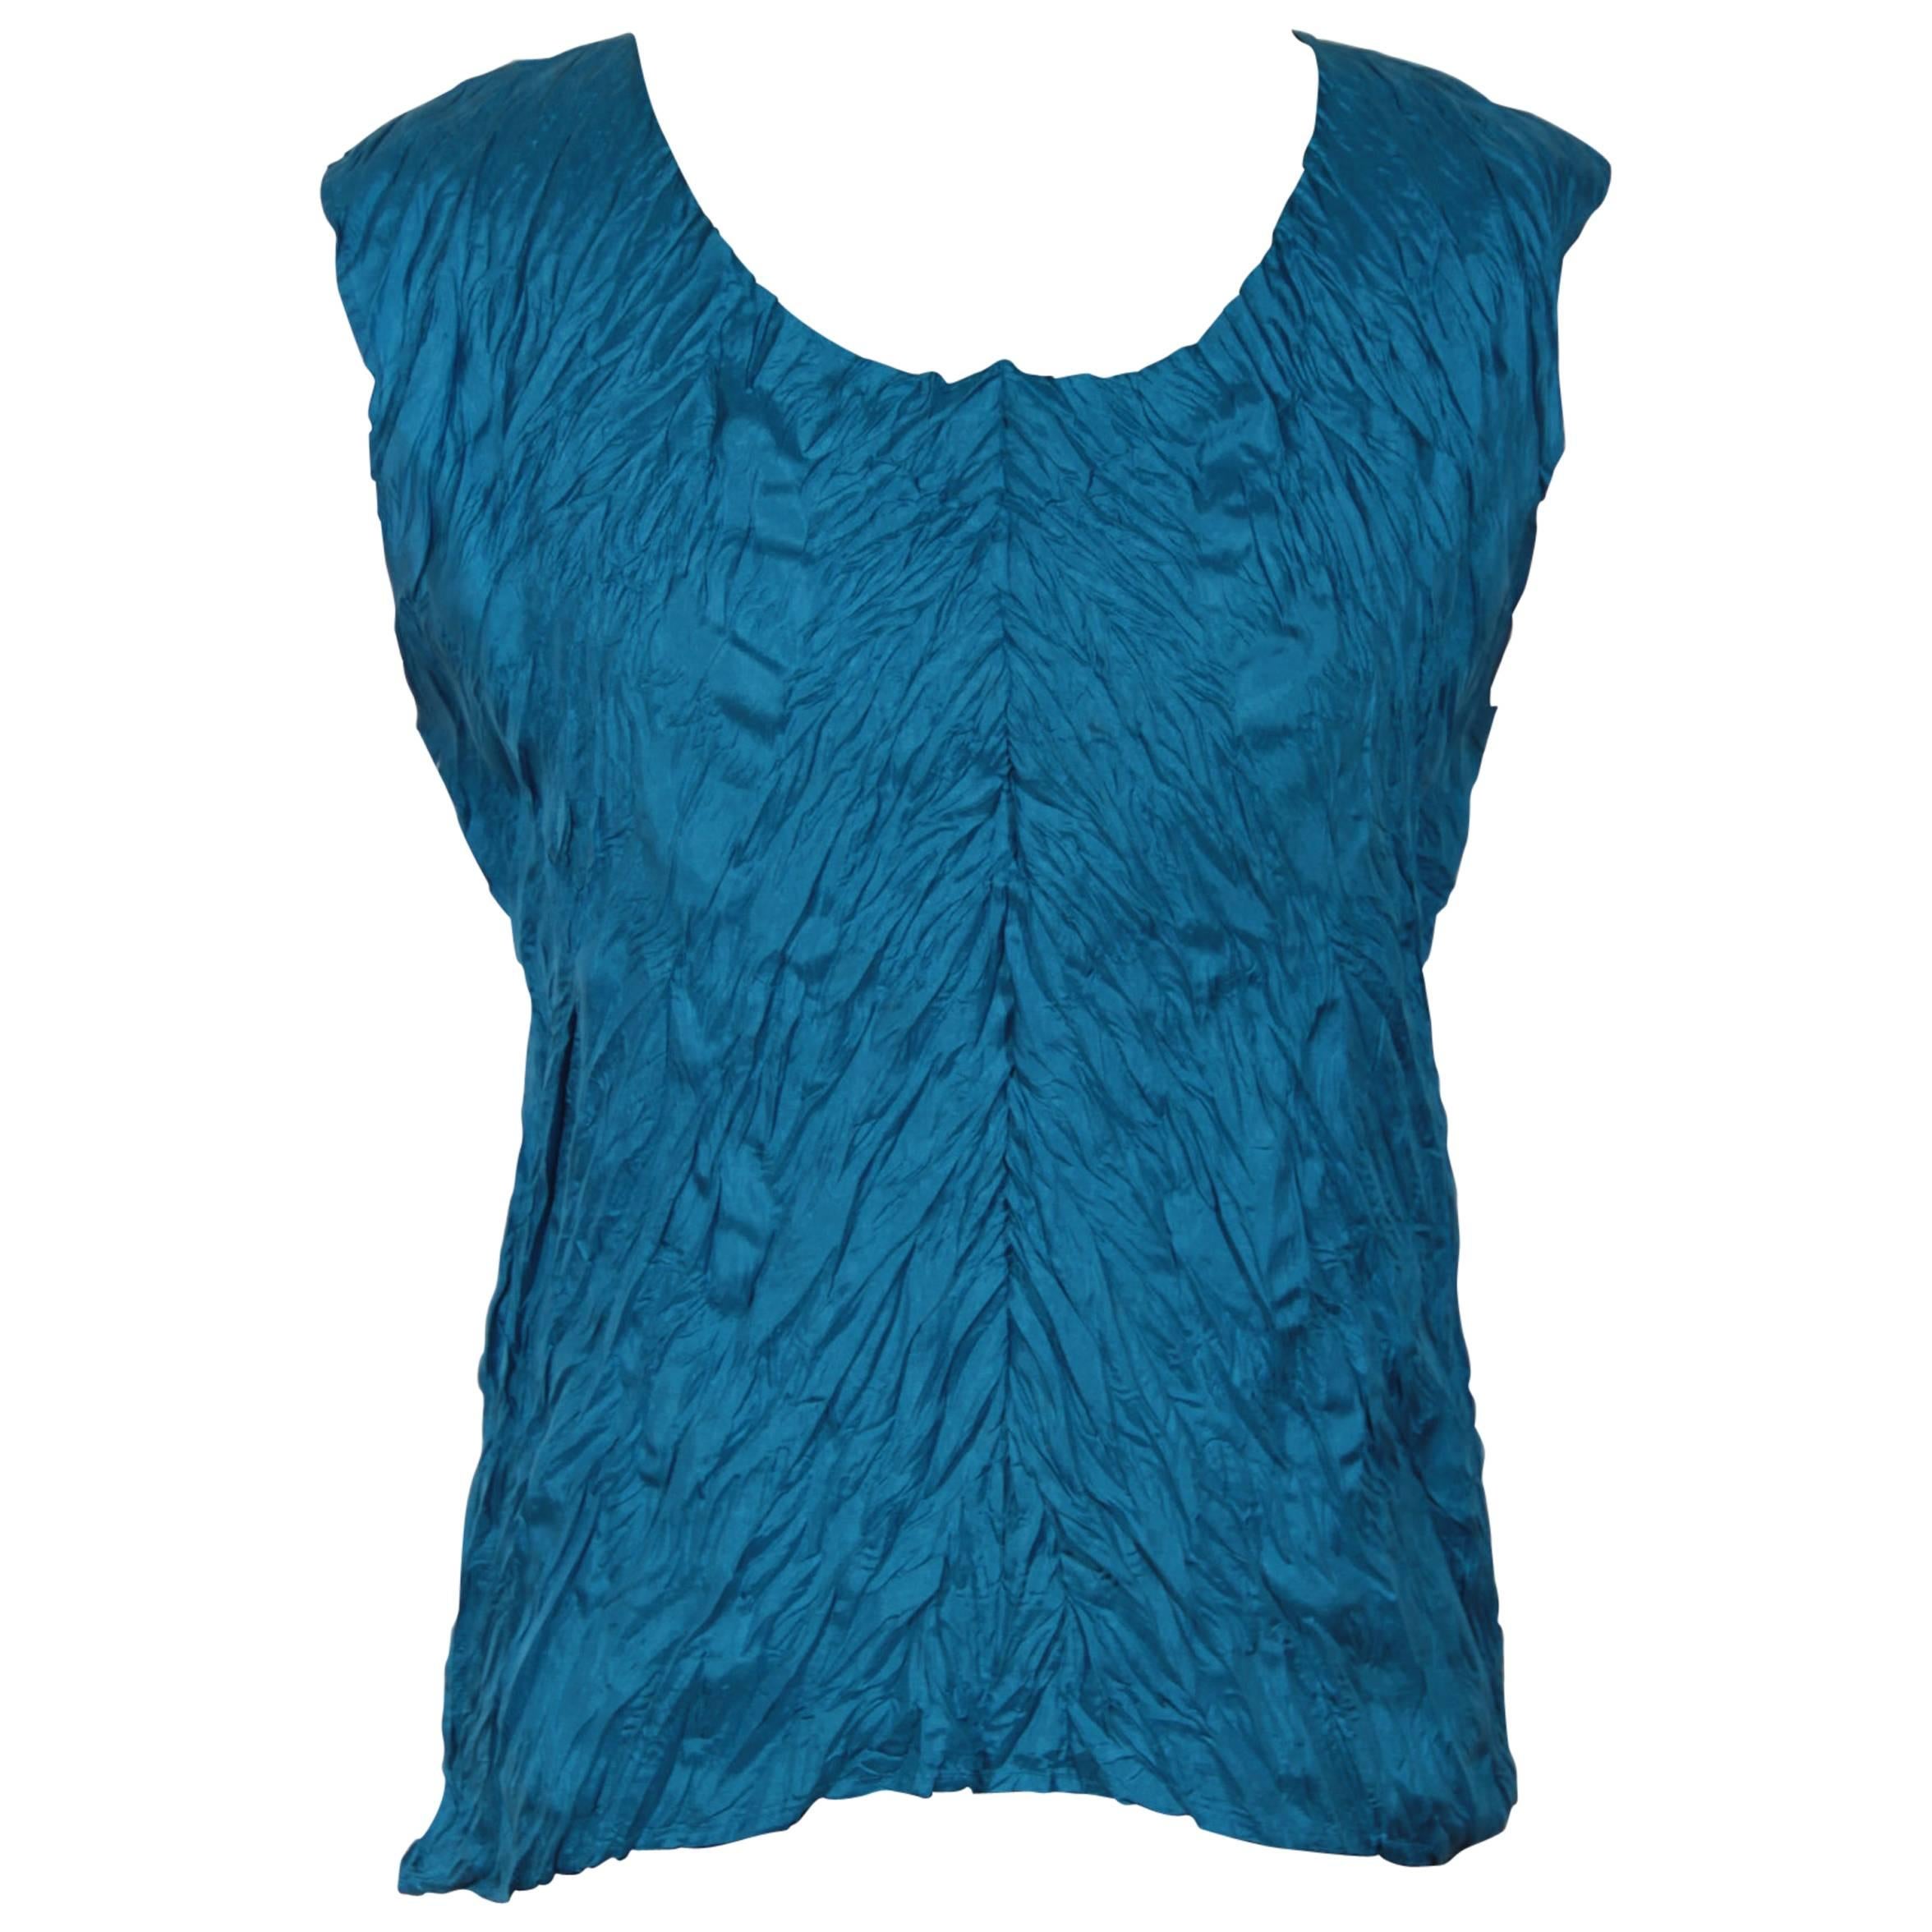 ISSEY MIYAKE Turquoise CRINKLE Poly Fabric SLEEVELESS TOP Vest SIZE M